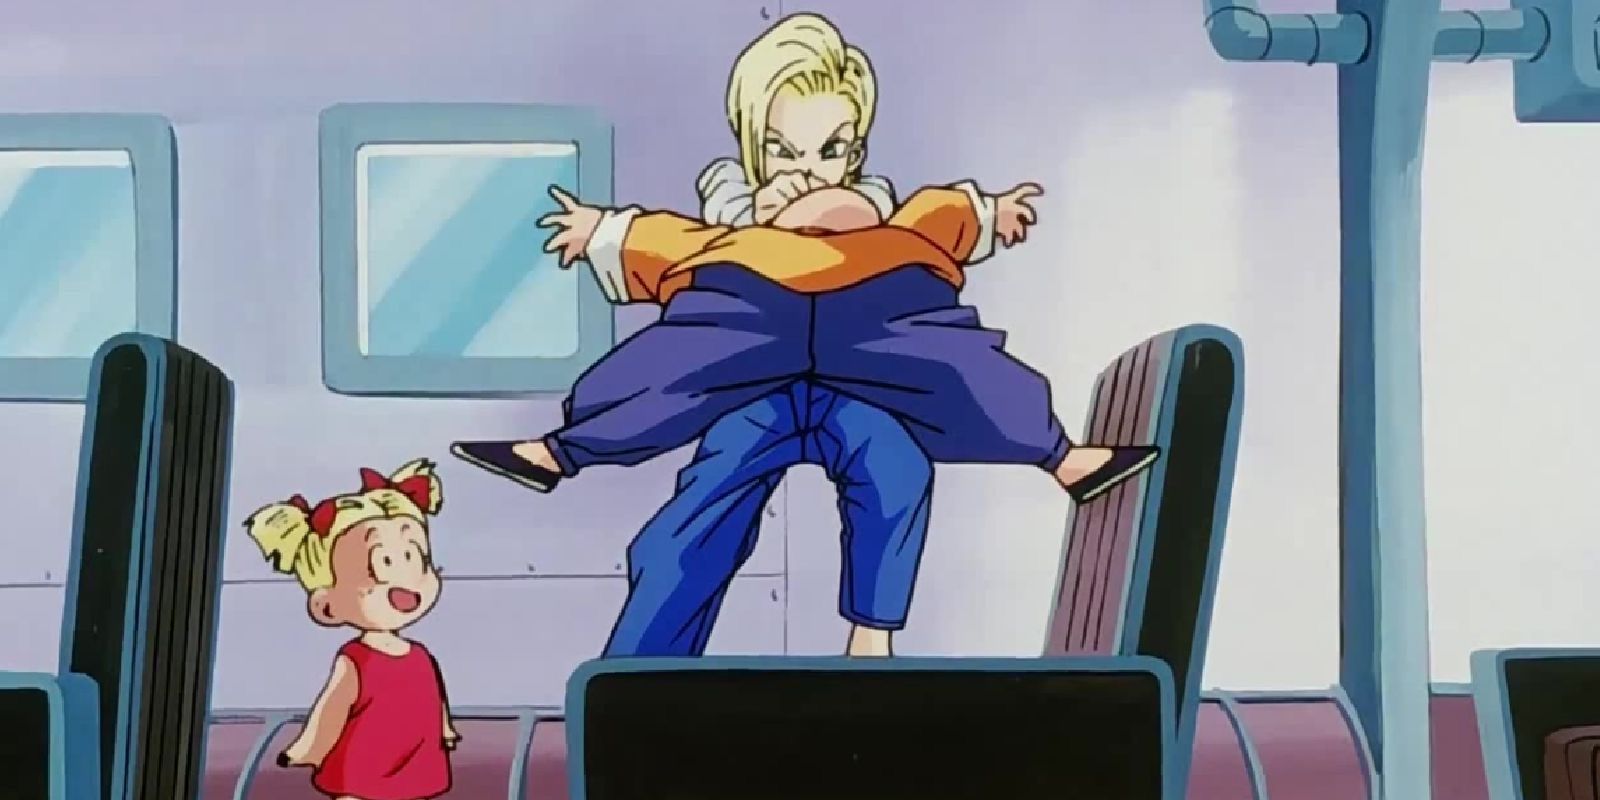 Android 18 beating up master roshi during the Buu Saga in DBZ